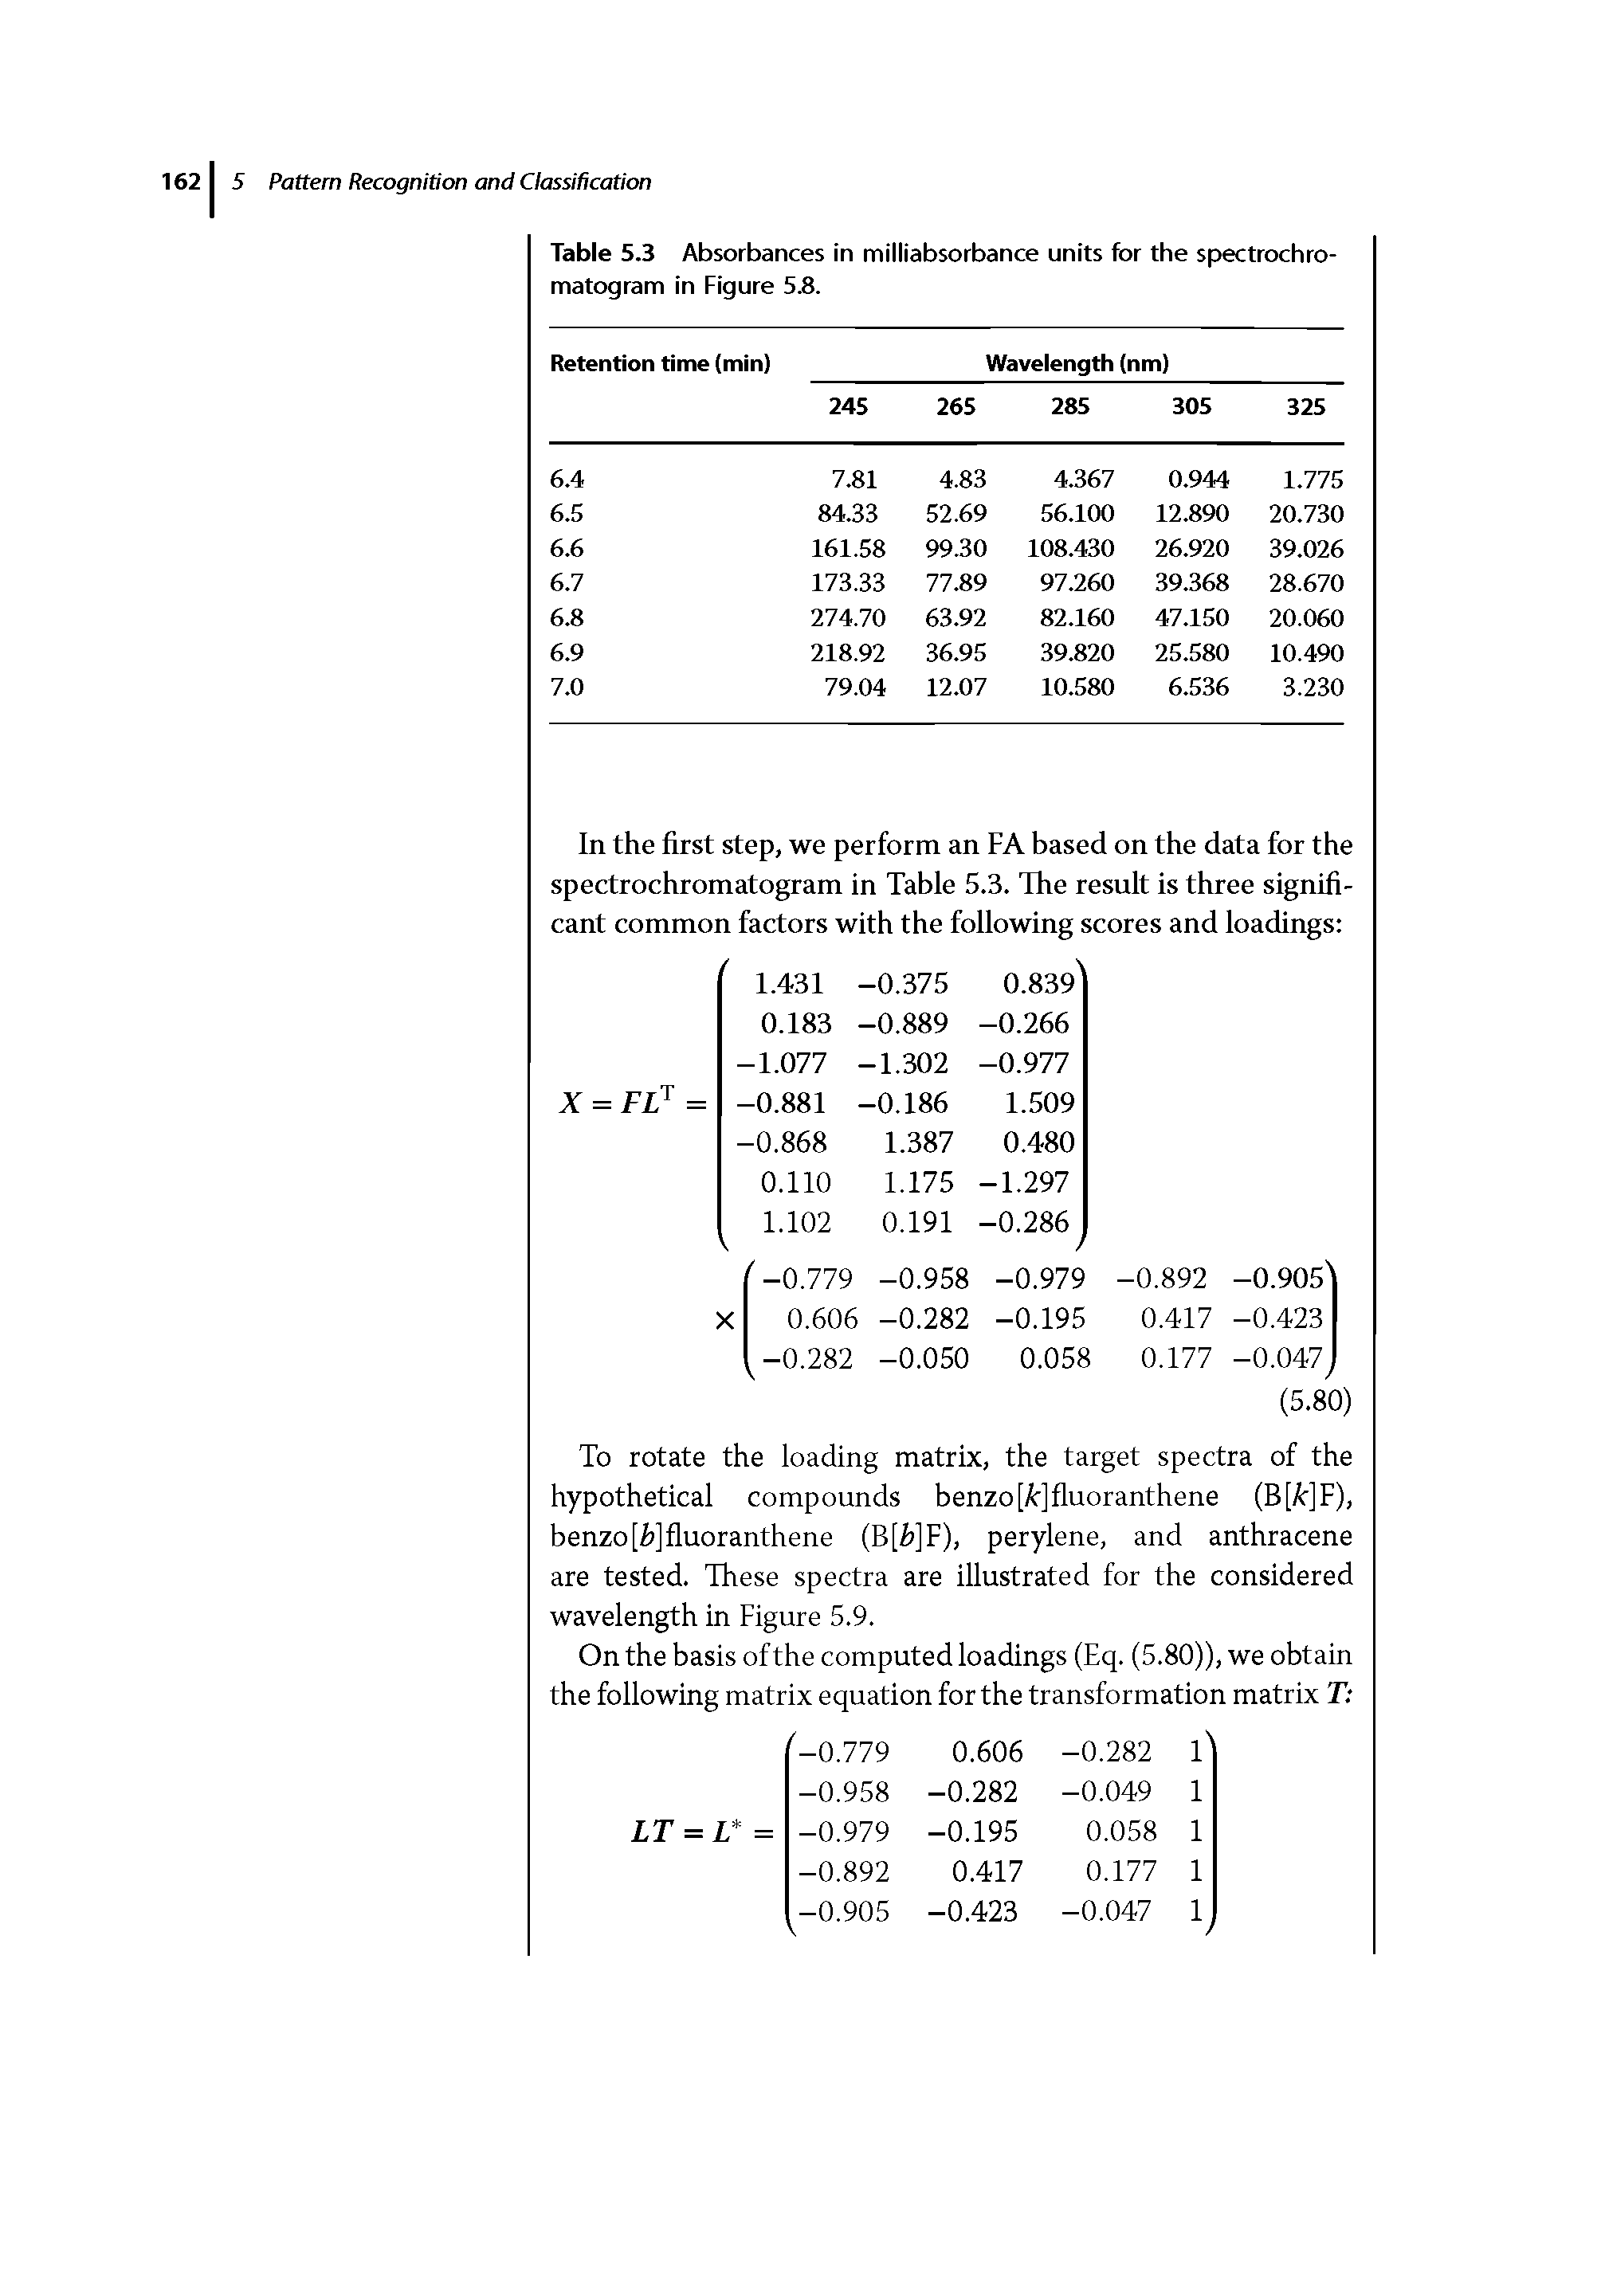 Table 5.3 Absorbances in milliabsorbance units for the spectrochro-matogram in Figure 5S.